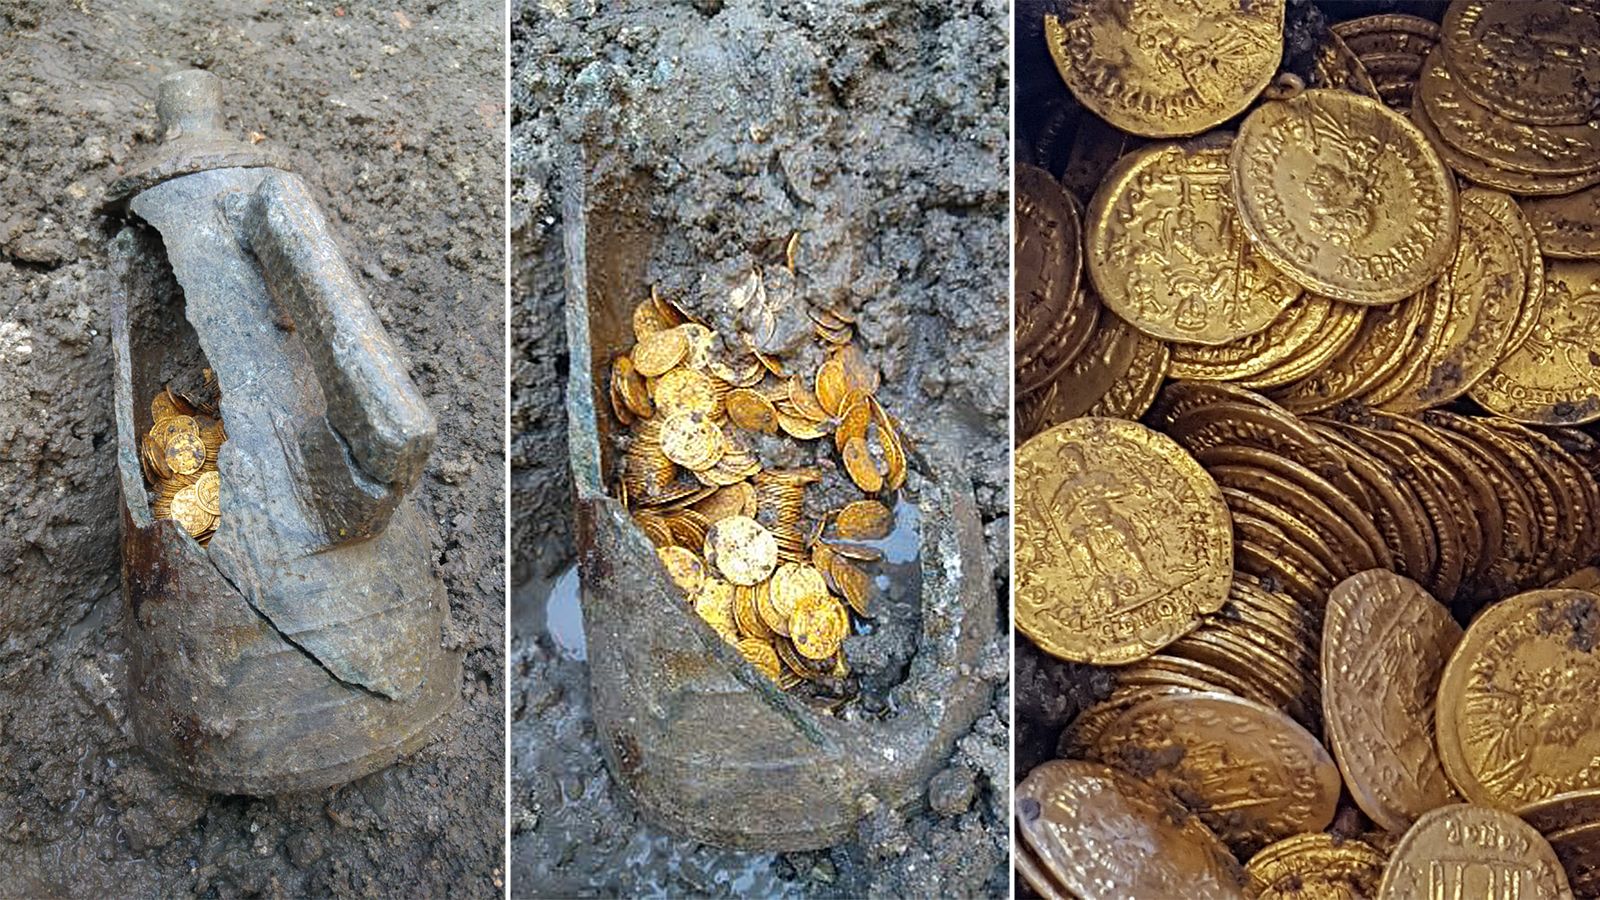 Hundreds of Roman gold coins found in basement of old theater